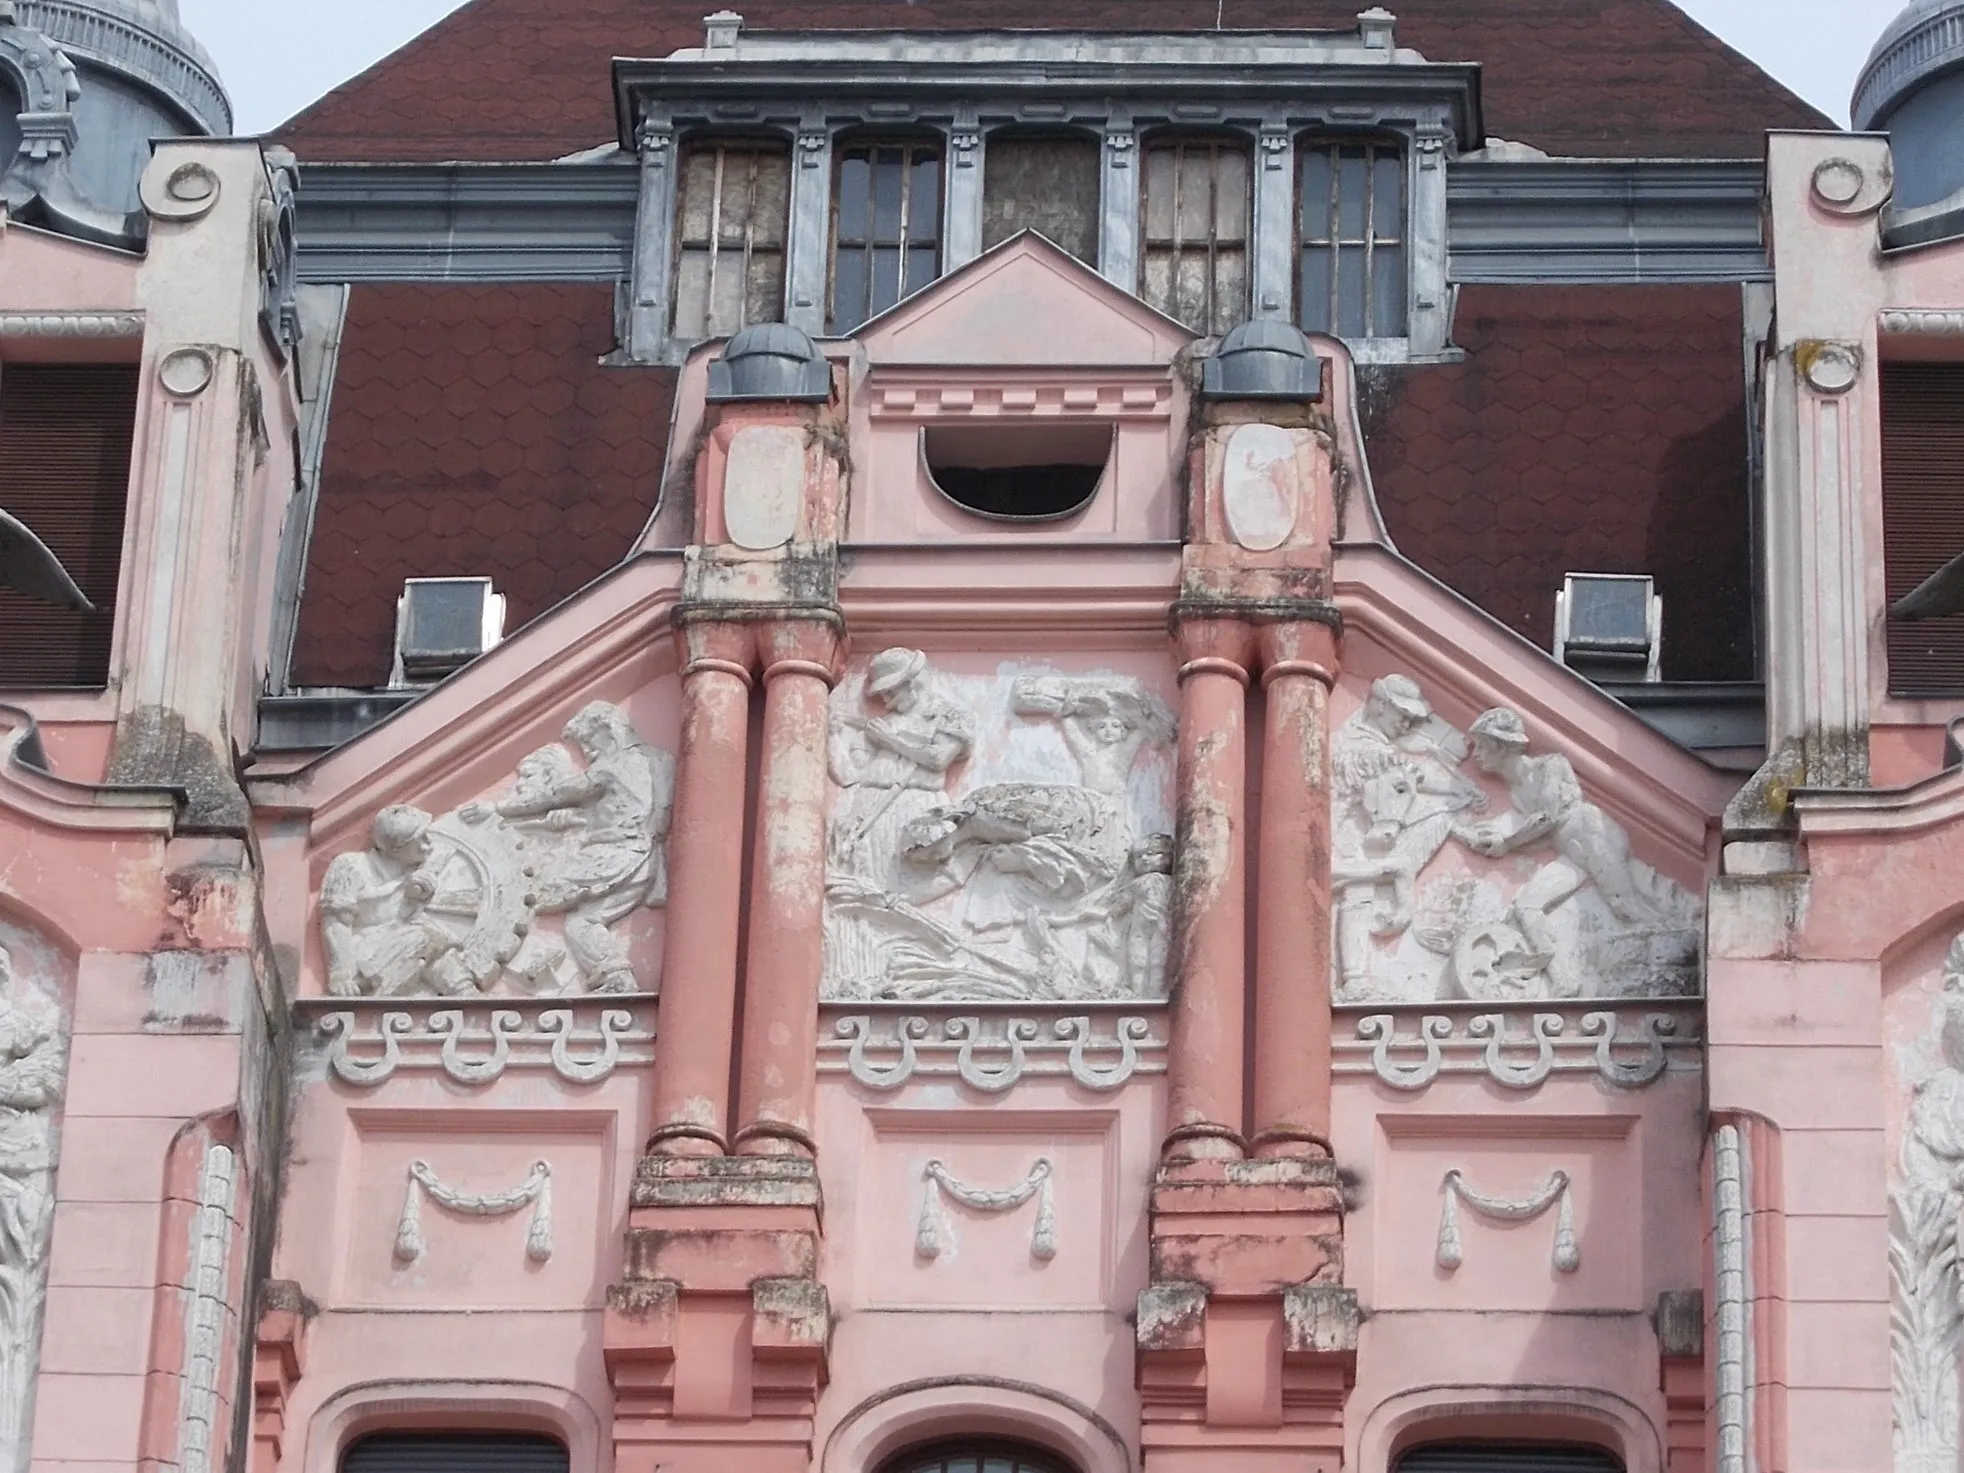 Photo showing: HQ of the former Debrecen First Savings Bank, west facade, mid part. Buil in 1912 Planned by Kálmán Rimanóczy Jr.. Construction contractors: István Tóth, Szilágyi and Pavlovits. Facade sculptures related to industry, agriculture and commerce and the nude male stuccos are Sándor Somogyi works ). There is couple bronze bird statues (Turul?). Inside coulmn capatáls made from Zsolnay ceramic. In addition to the premises of the Savings Bank, there were shops on the ground floor, on the Kossuth street side there were originally an officer's casino, in the cellar there was a beer hall and restaurant, on the floors there were seventeen luxury rental apartments. - 22-24 Piac Street, Inner City,Debrecen, Hajdú-Bihar County, Hungary.